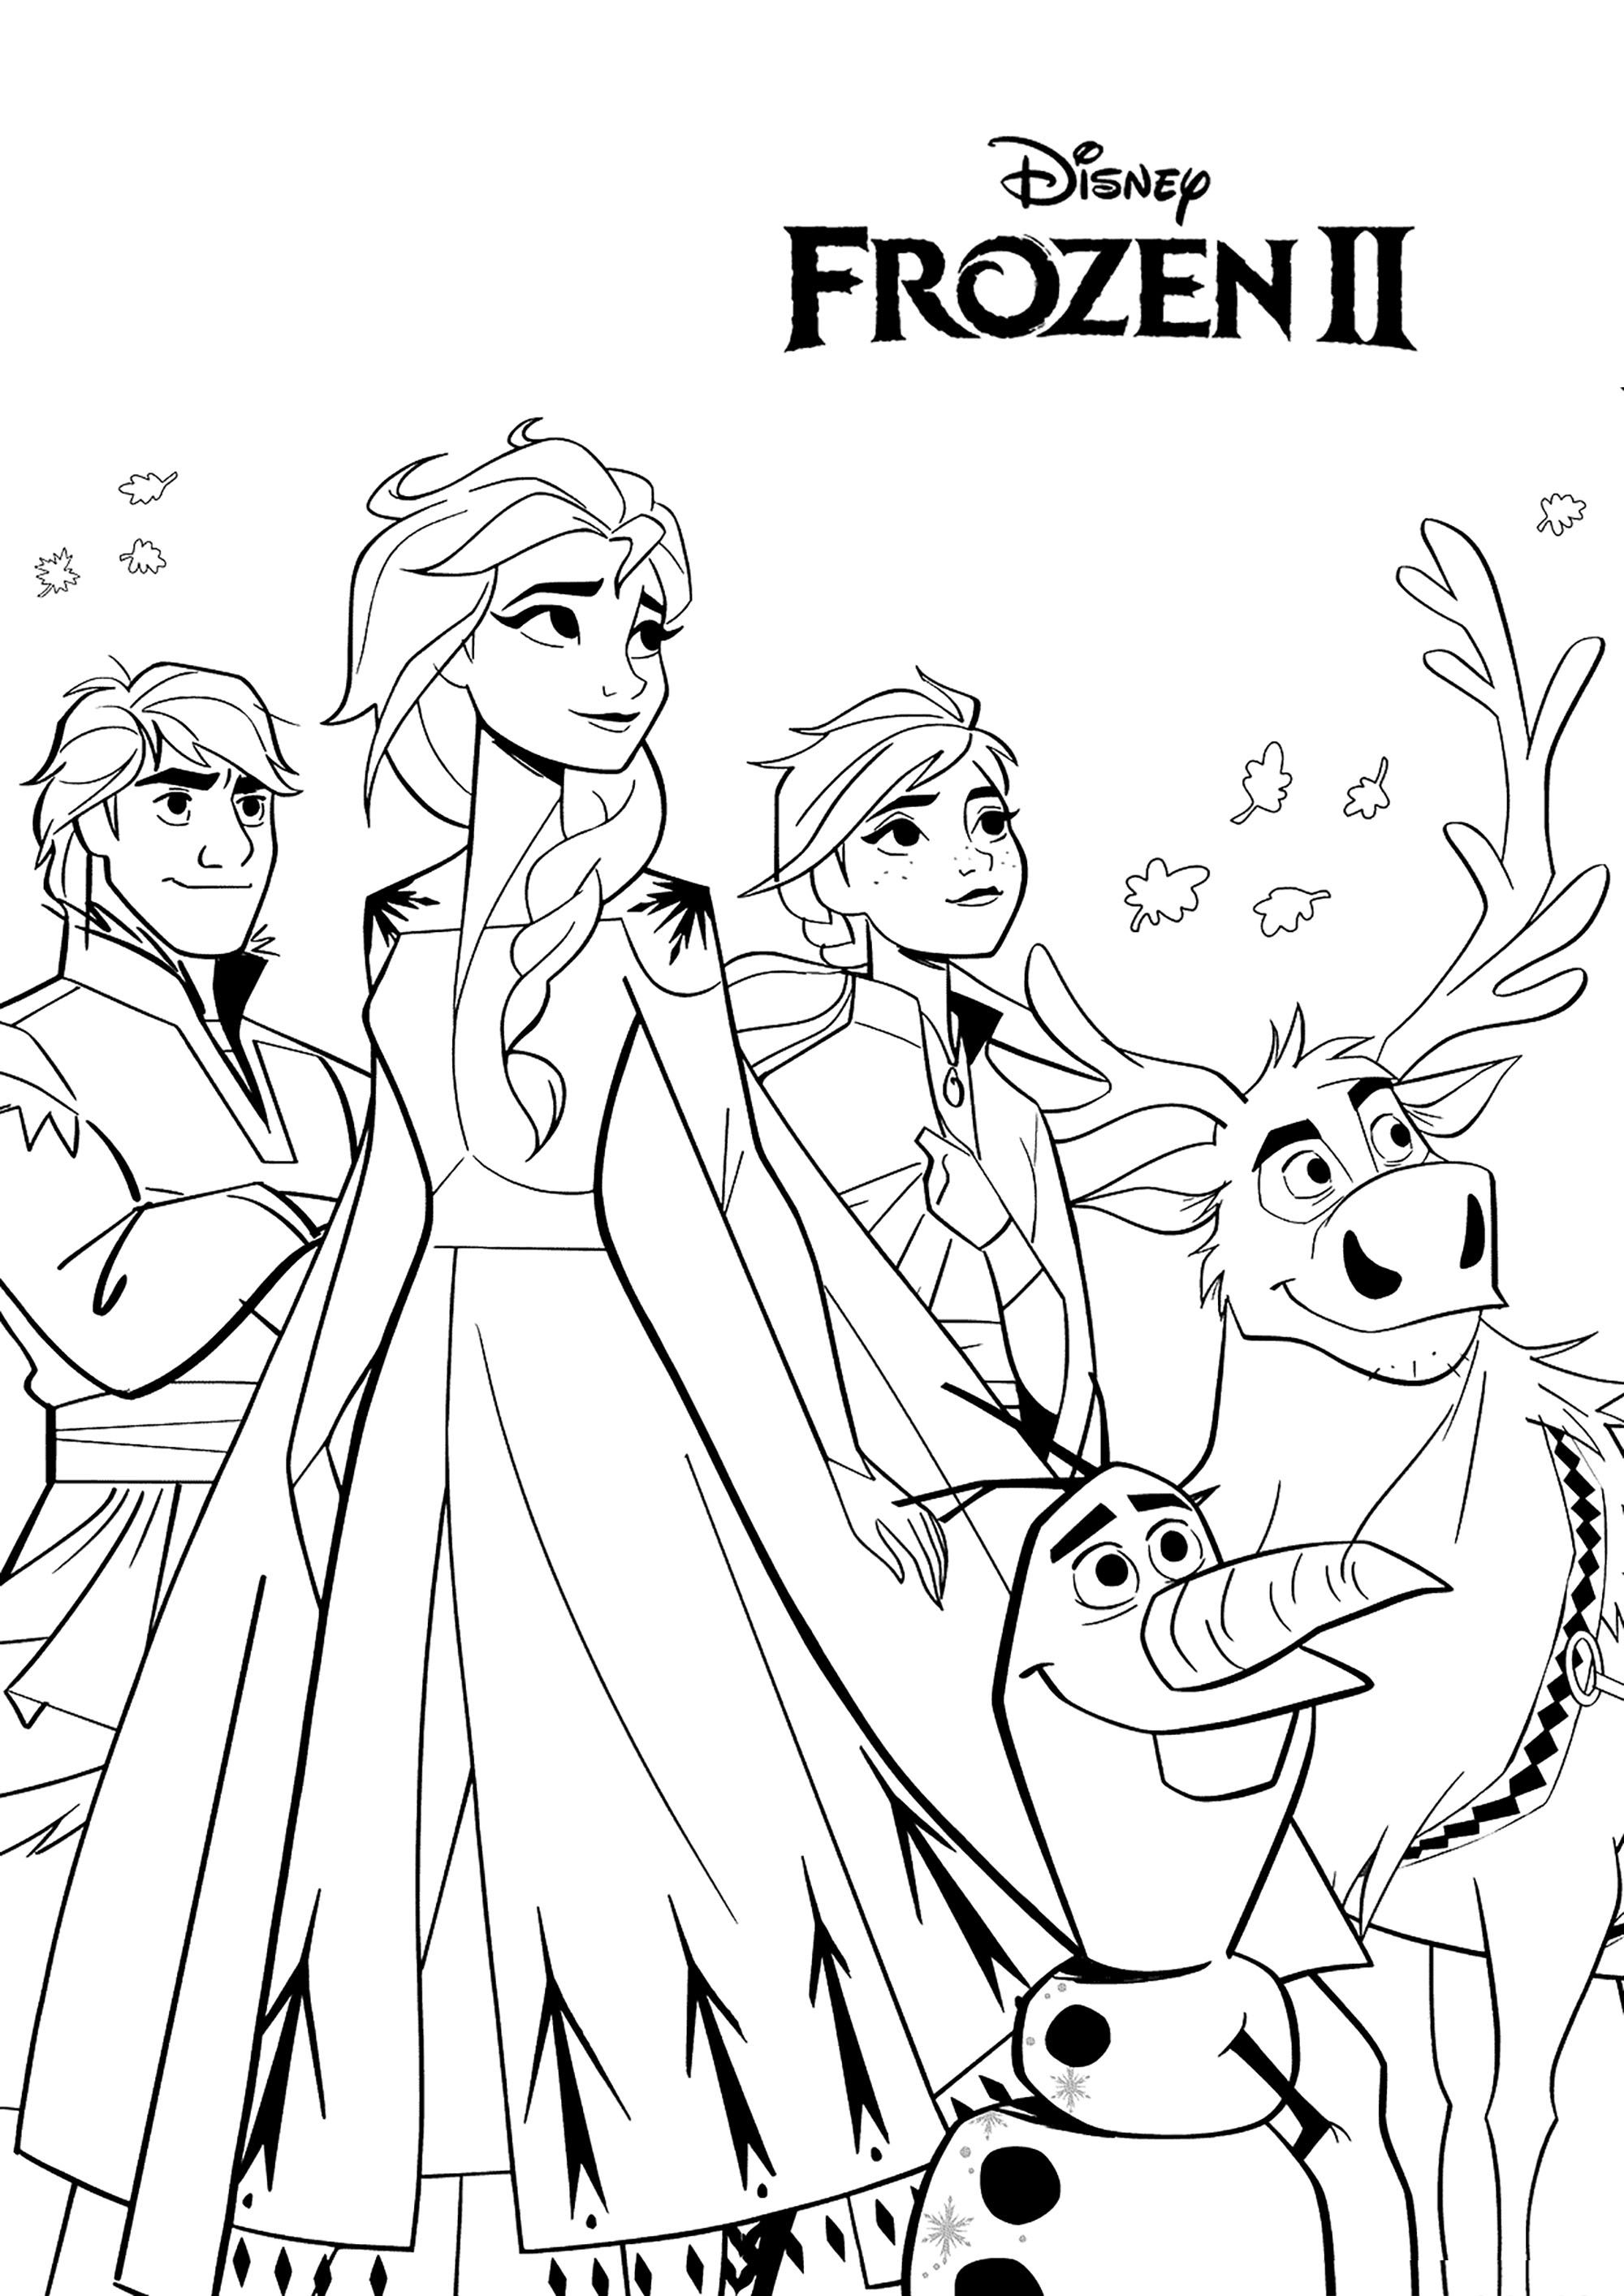 Frozen 200 To Print   Frozen 200 Kids Coloring Pages   Coloring Home